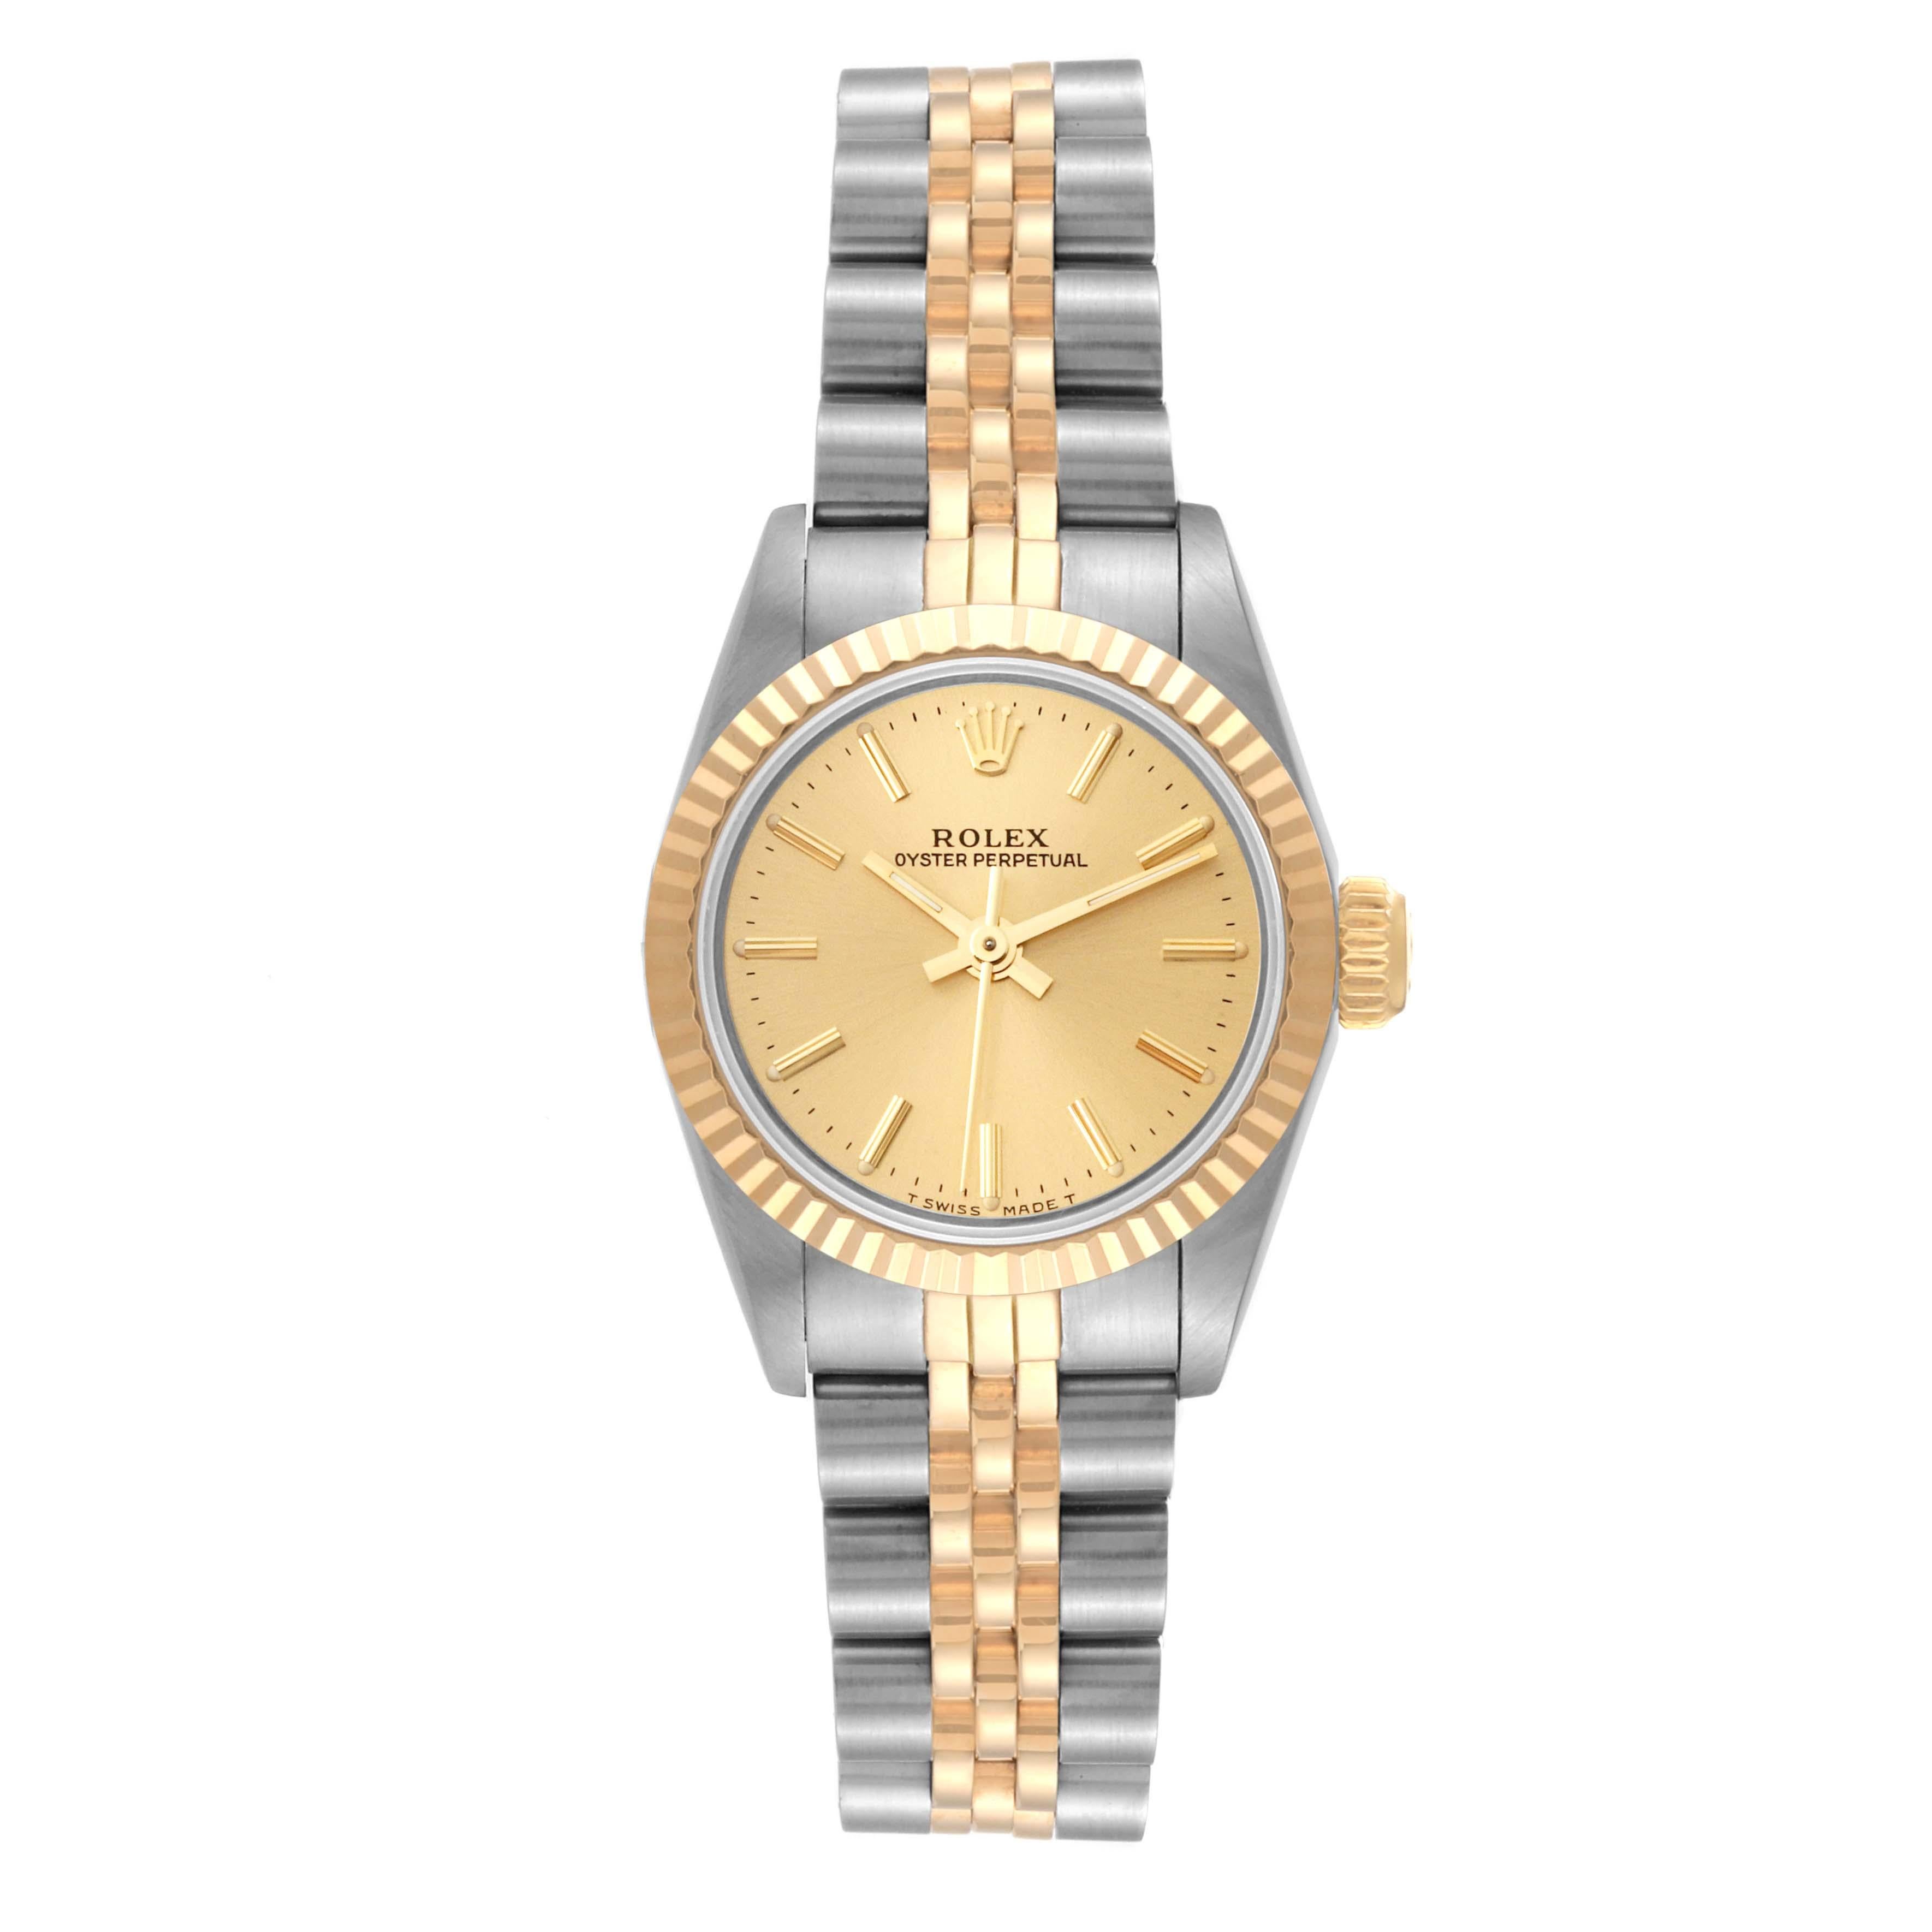 Rolex Oyster Perpetual Champagne Dial Steel Yellow Gold Ladies Watch 67193. Officially certified chronometer automatic self-winding movement. Stainless steel oyster case 24.0 mm in diameter. Rolex logo on an 18k yellow gold crown. 18k yellow gold